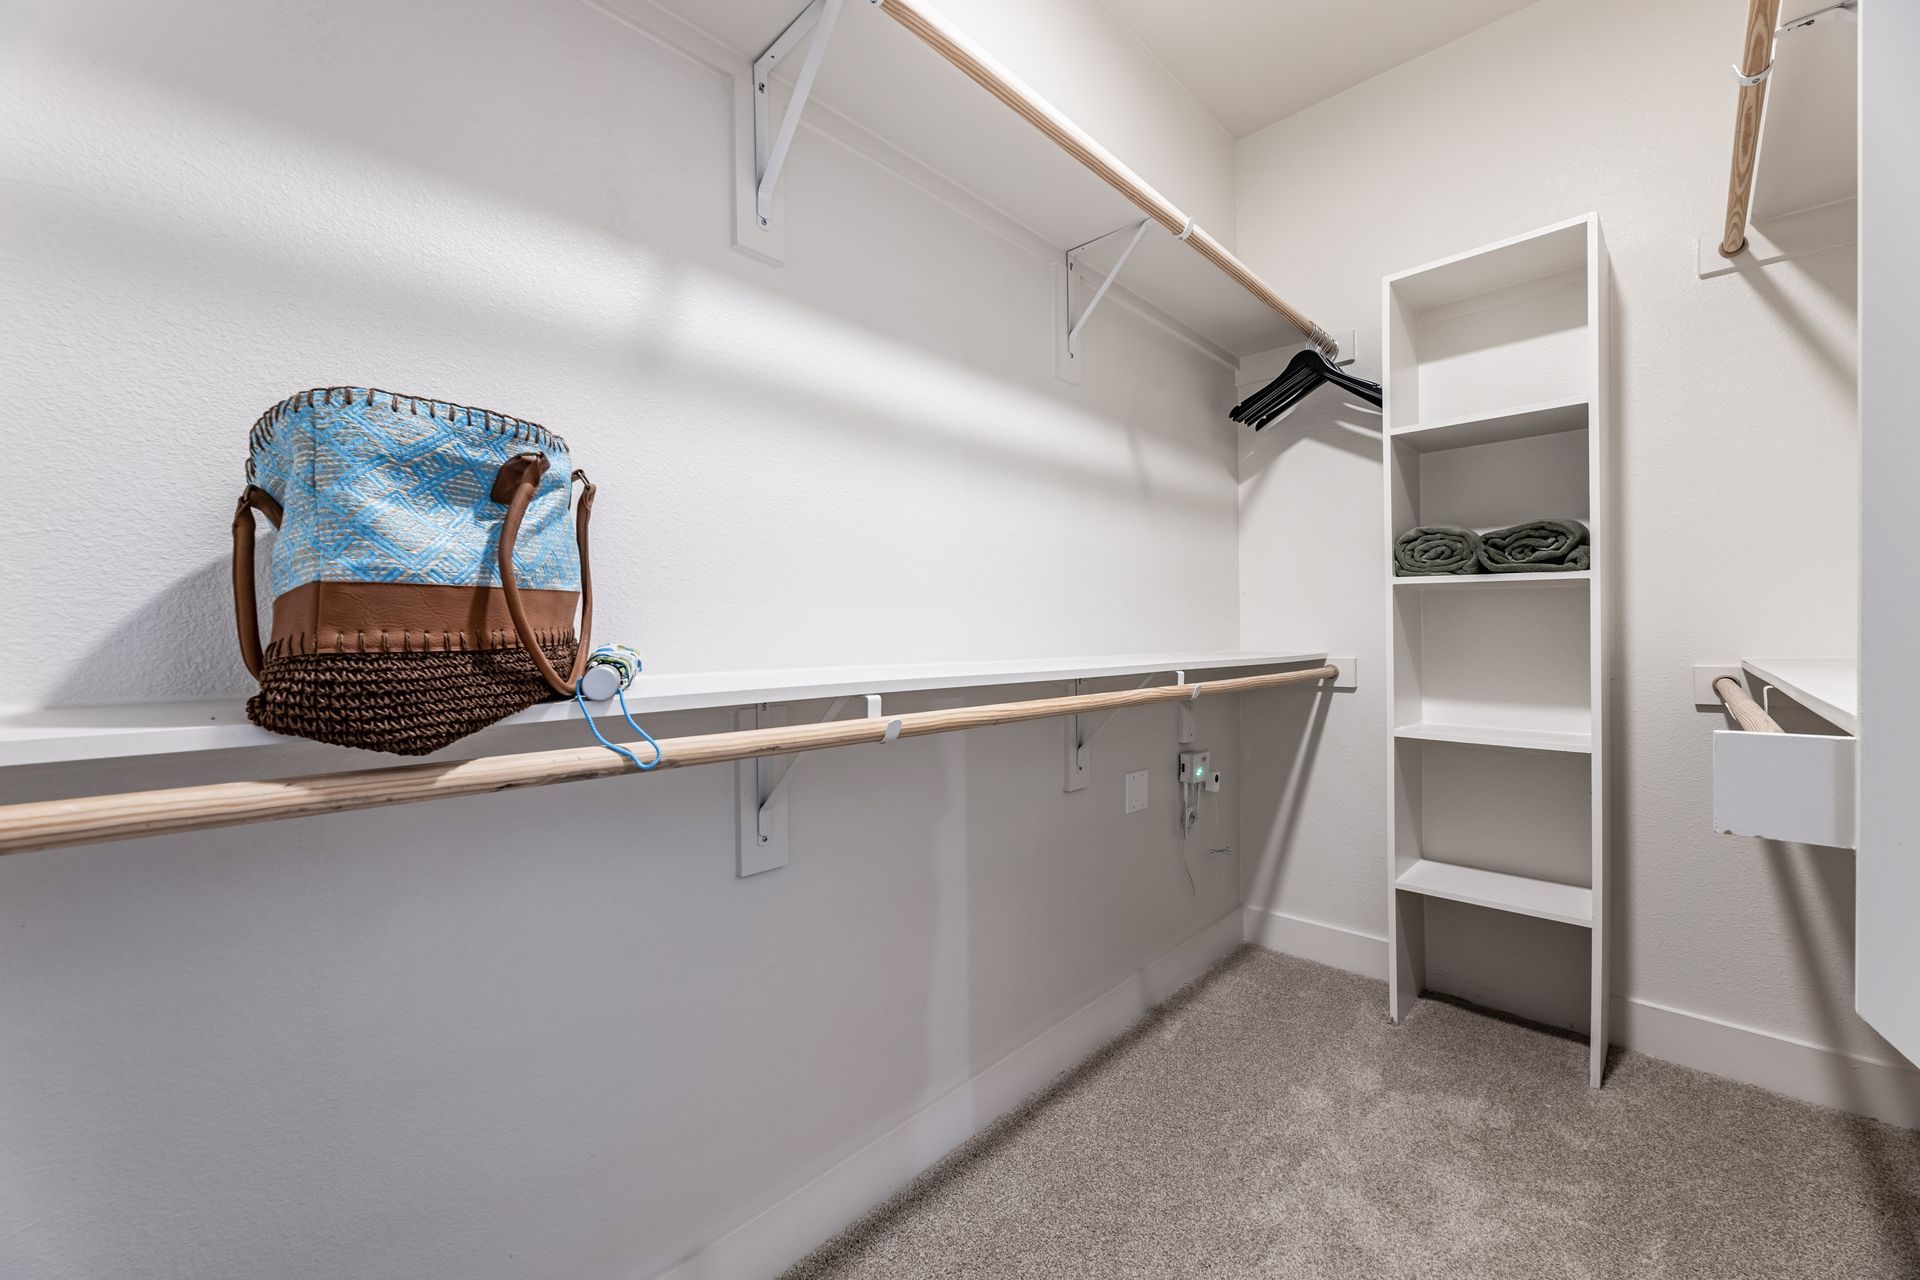 A walk-in closet with shelves and a basket on the shelf at Parkside at Craig Ranch.